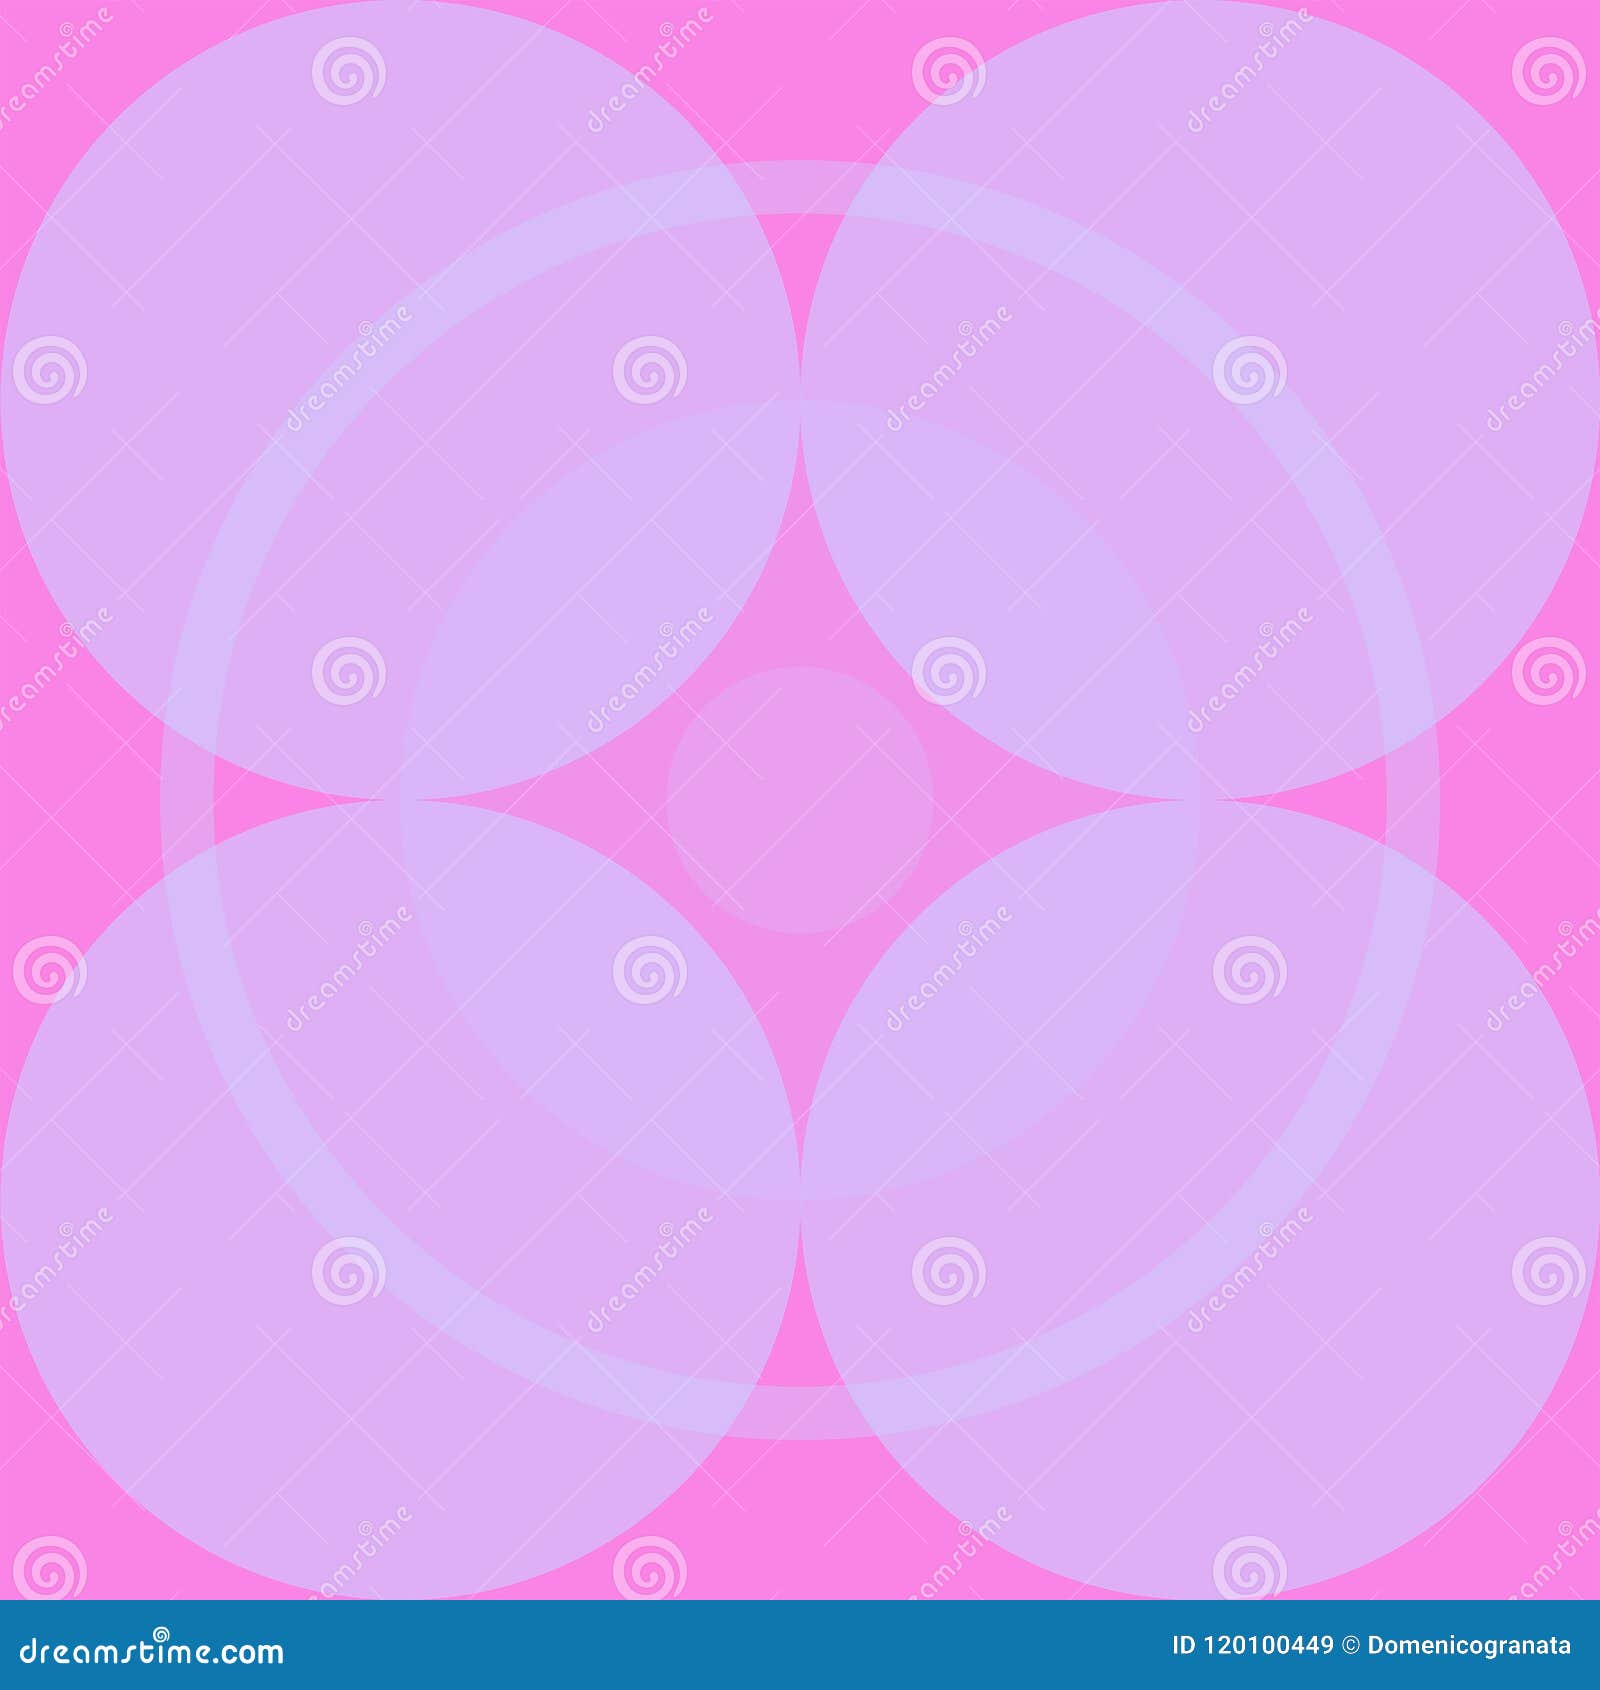 four circles on a pink background